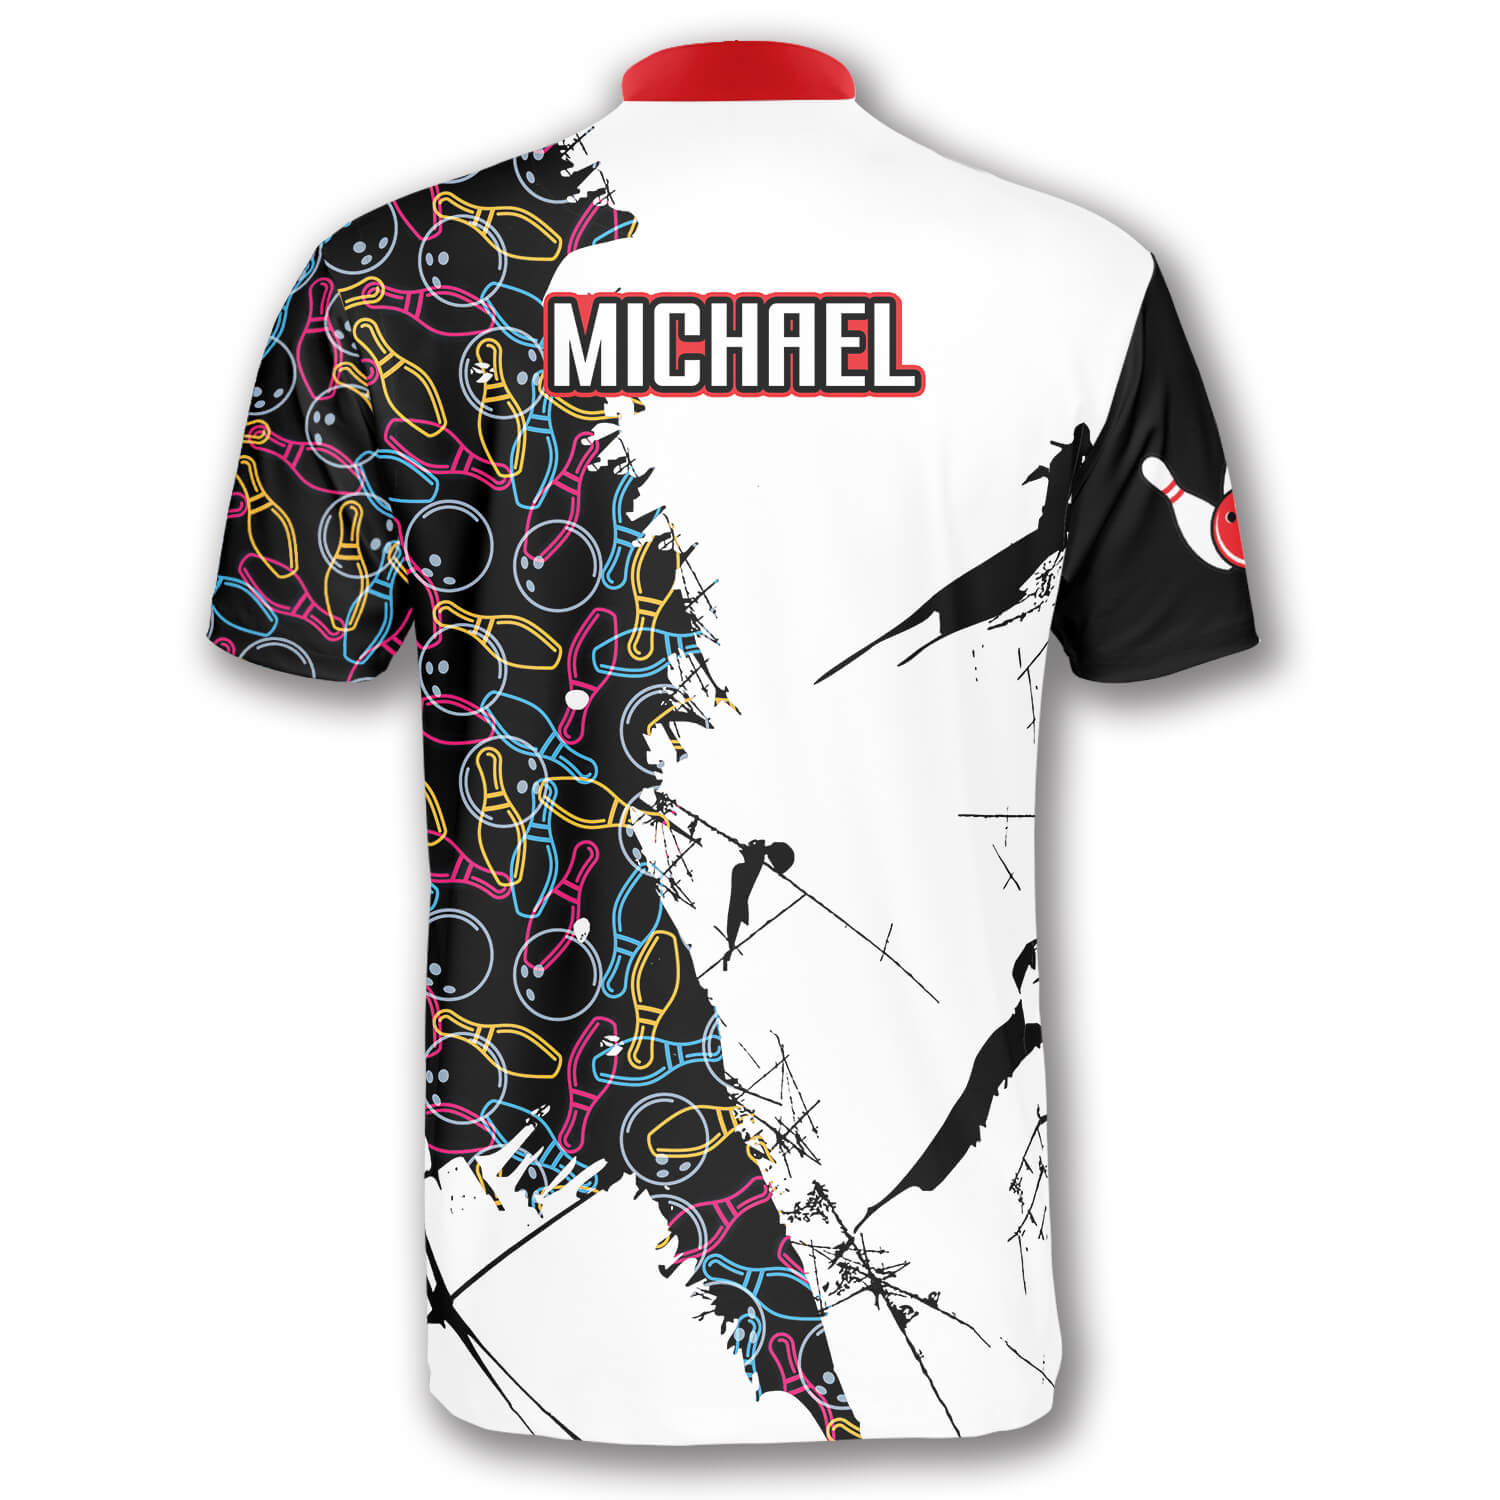 Bowling Force Custom Bowling Jerseys for Men/ 3D All Over Print Bowling Shirt/ Gift for Him